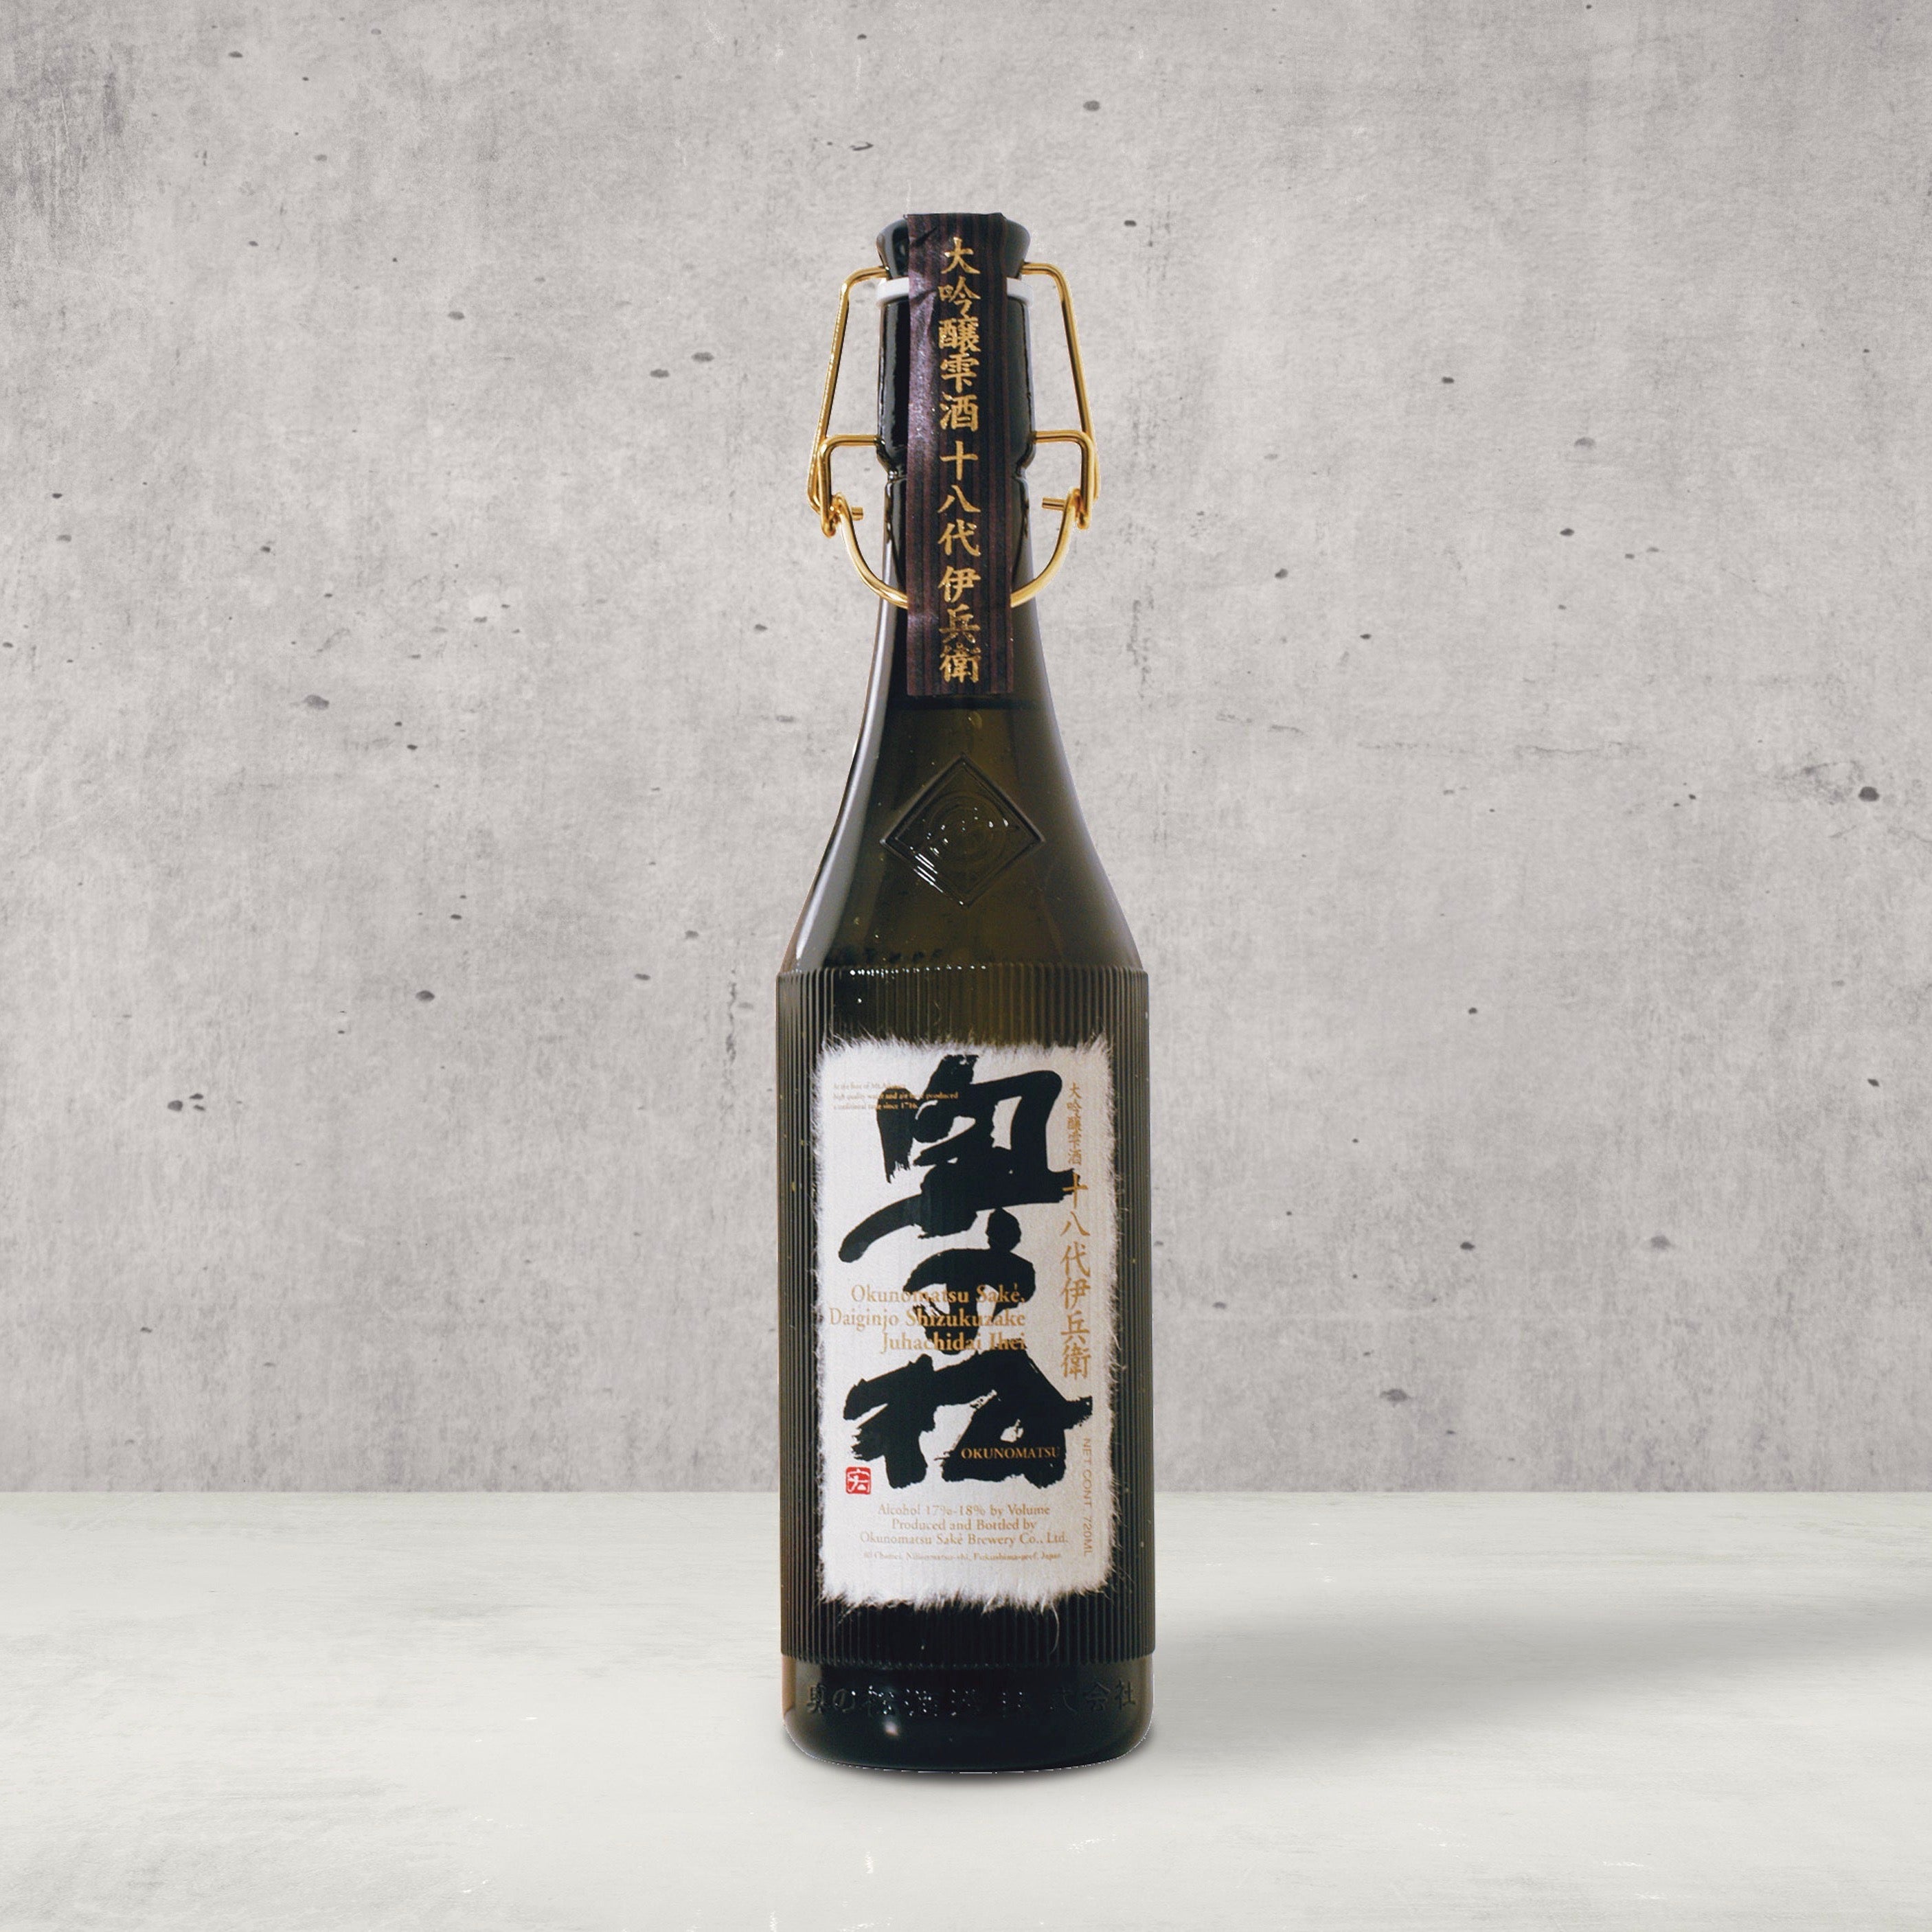 Okunomatsu Juhachidai Ihei Sake. Okunomatsu Sake. Premium High End Luxury Sake. A shizukuzake with overall delicate flavor and fruity lightness that spreads nicely across the tongue in crisp waves, accented by a balanced fragrance. Flagship daiginjo of Okunomatsu, this sake is named for the greatly revered last president who was the 18th generation. 2019 BTI World Wine Championships Gold Medal. Shop Japanese sake drinks online.